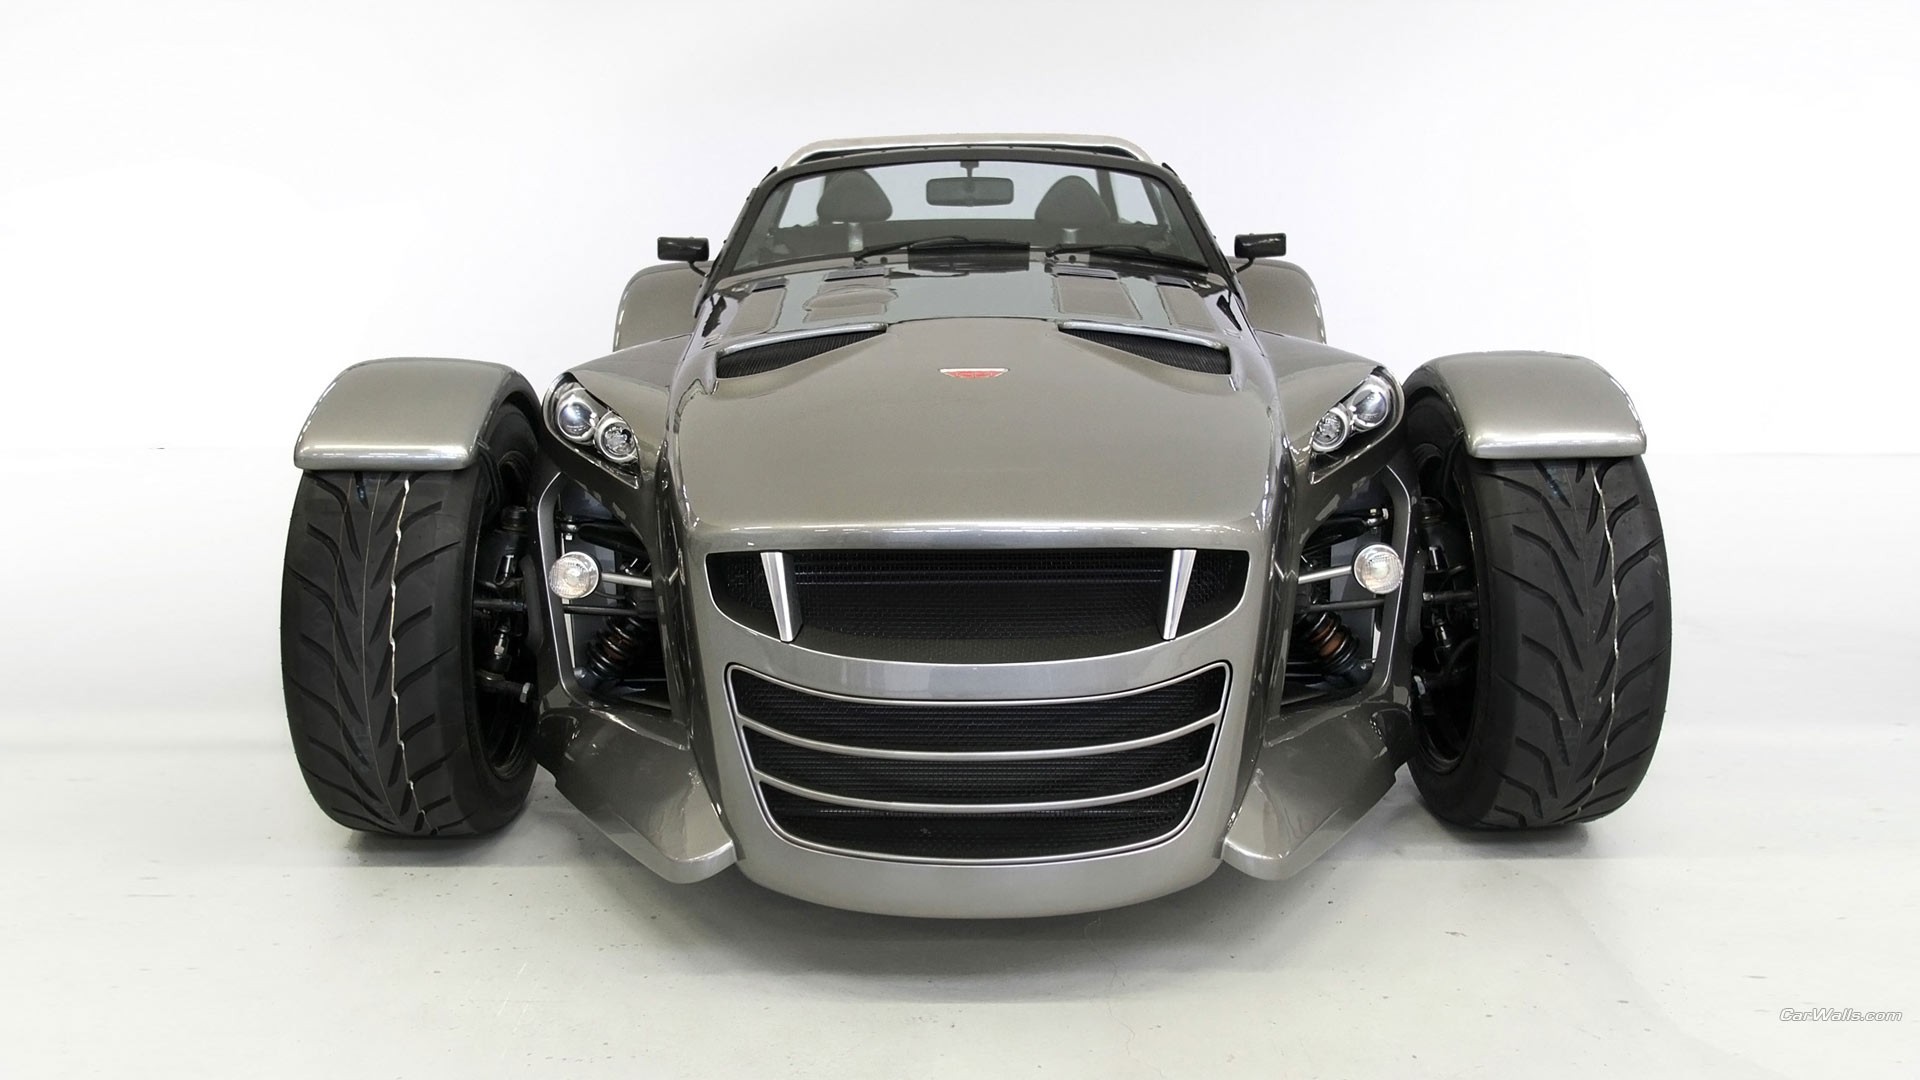 Donkervoort D8 GTO front view.